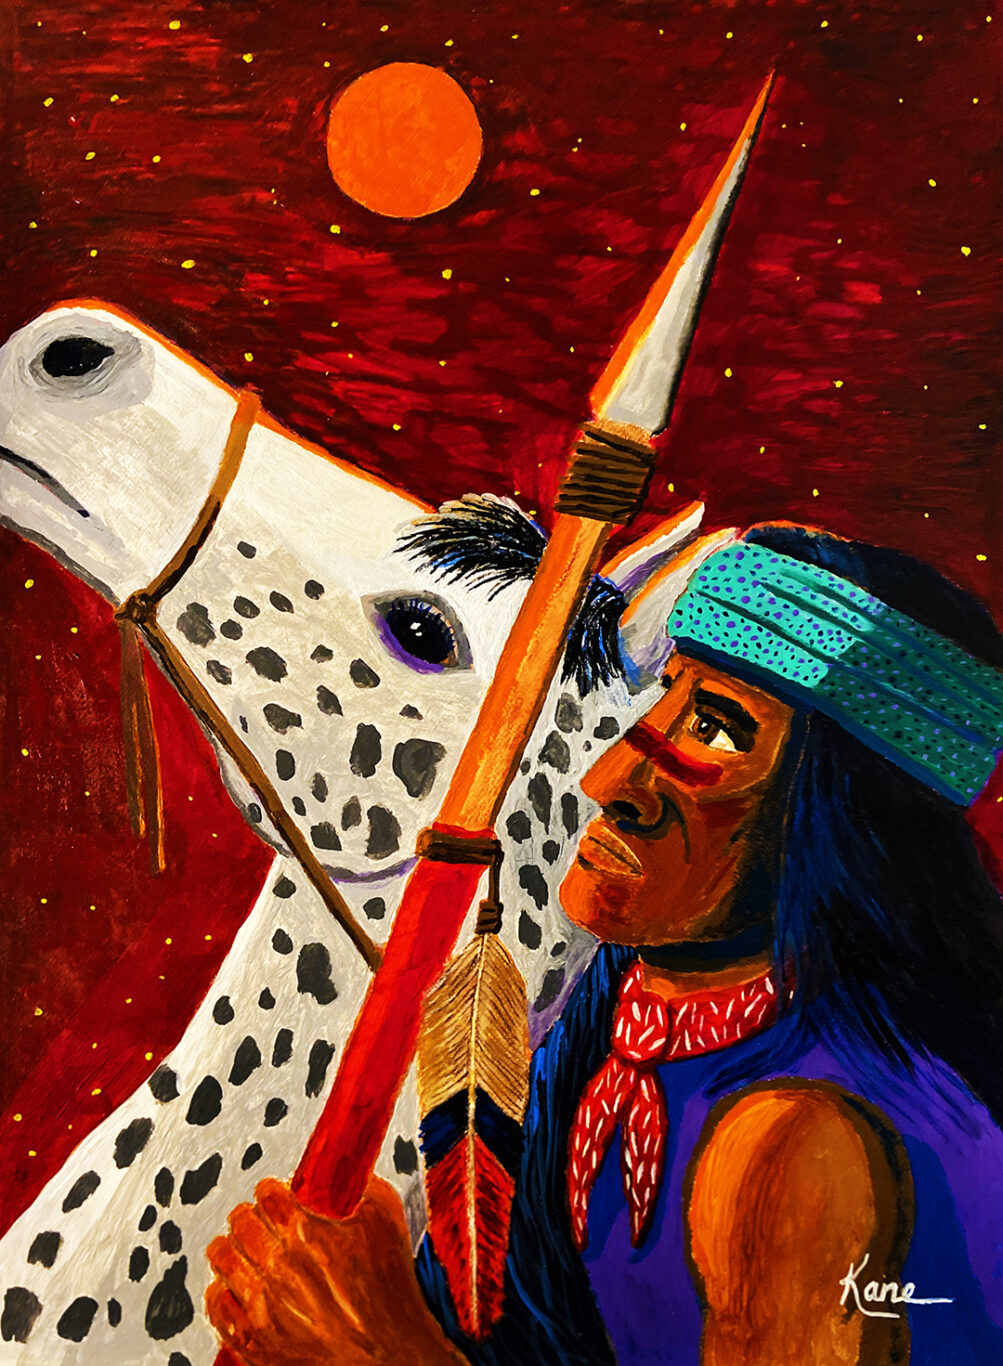 Image of Apache on white horse with red night sky background. Title: Night Flight From the Rez